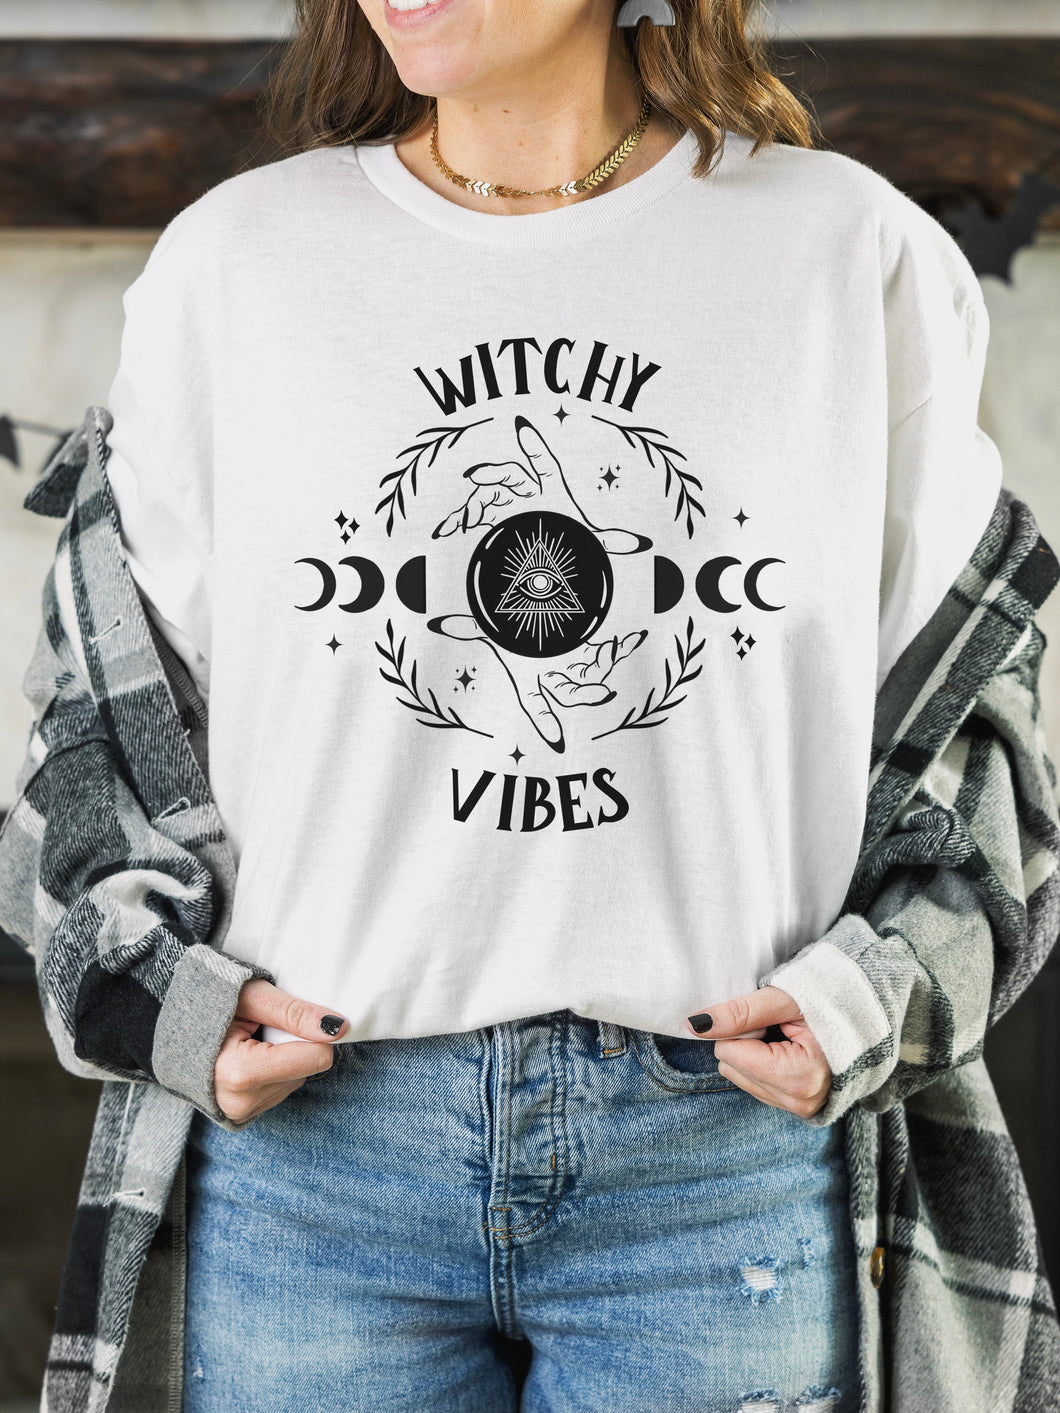 Witchy Vibes Vinyl T-Shirt